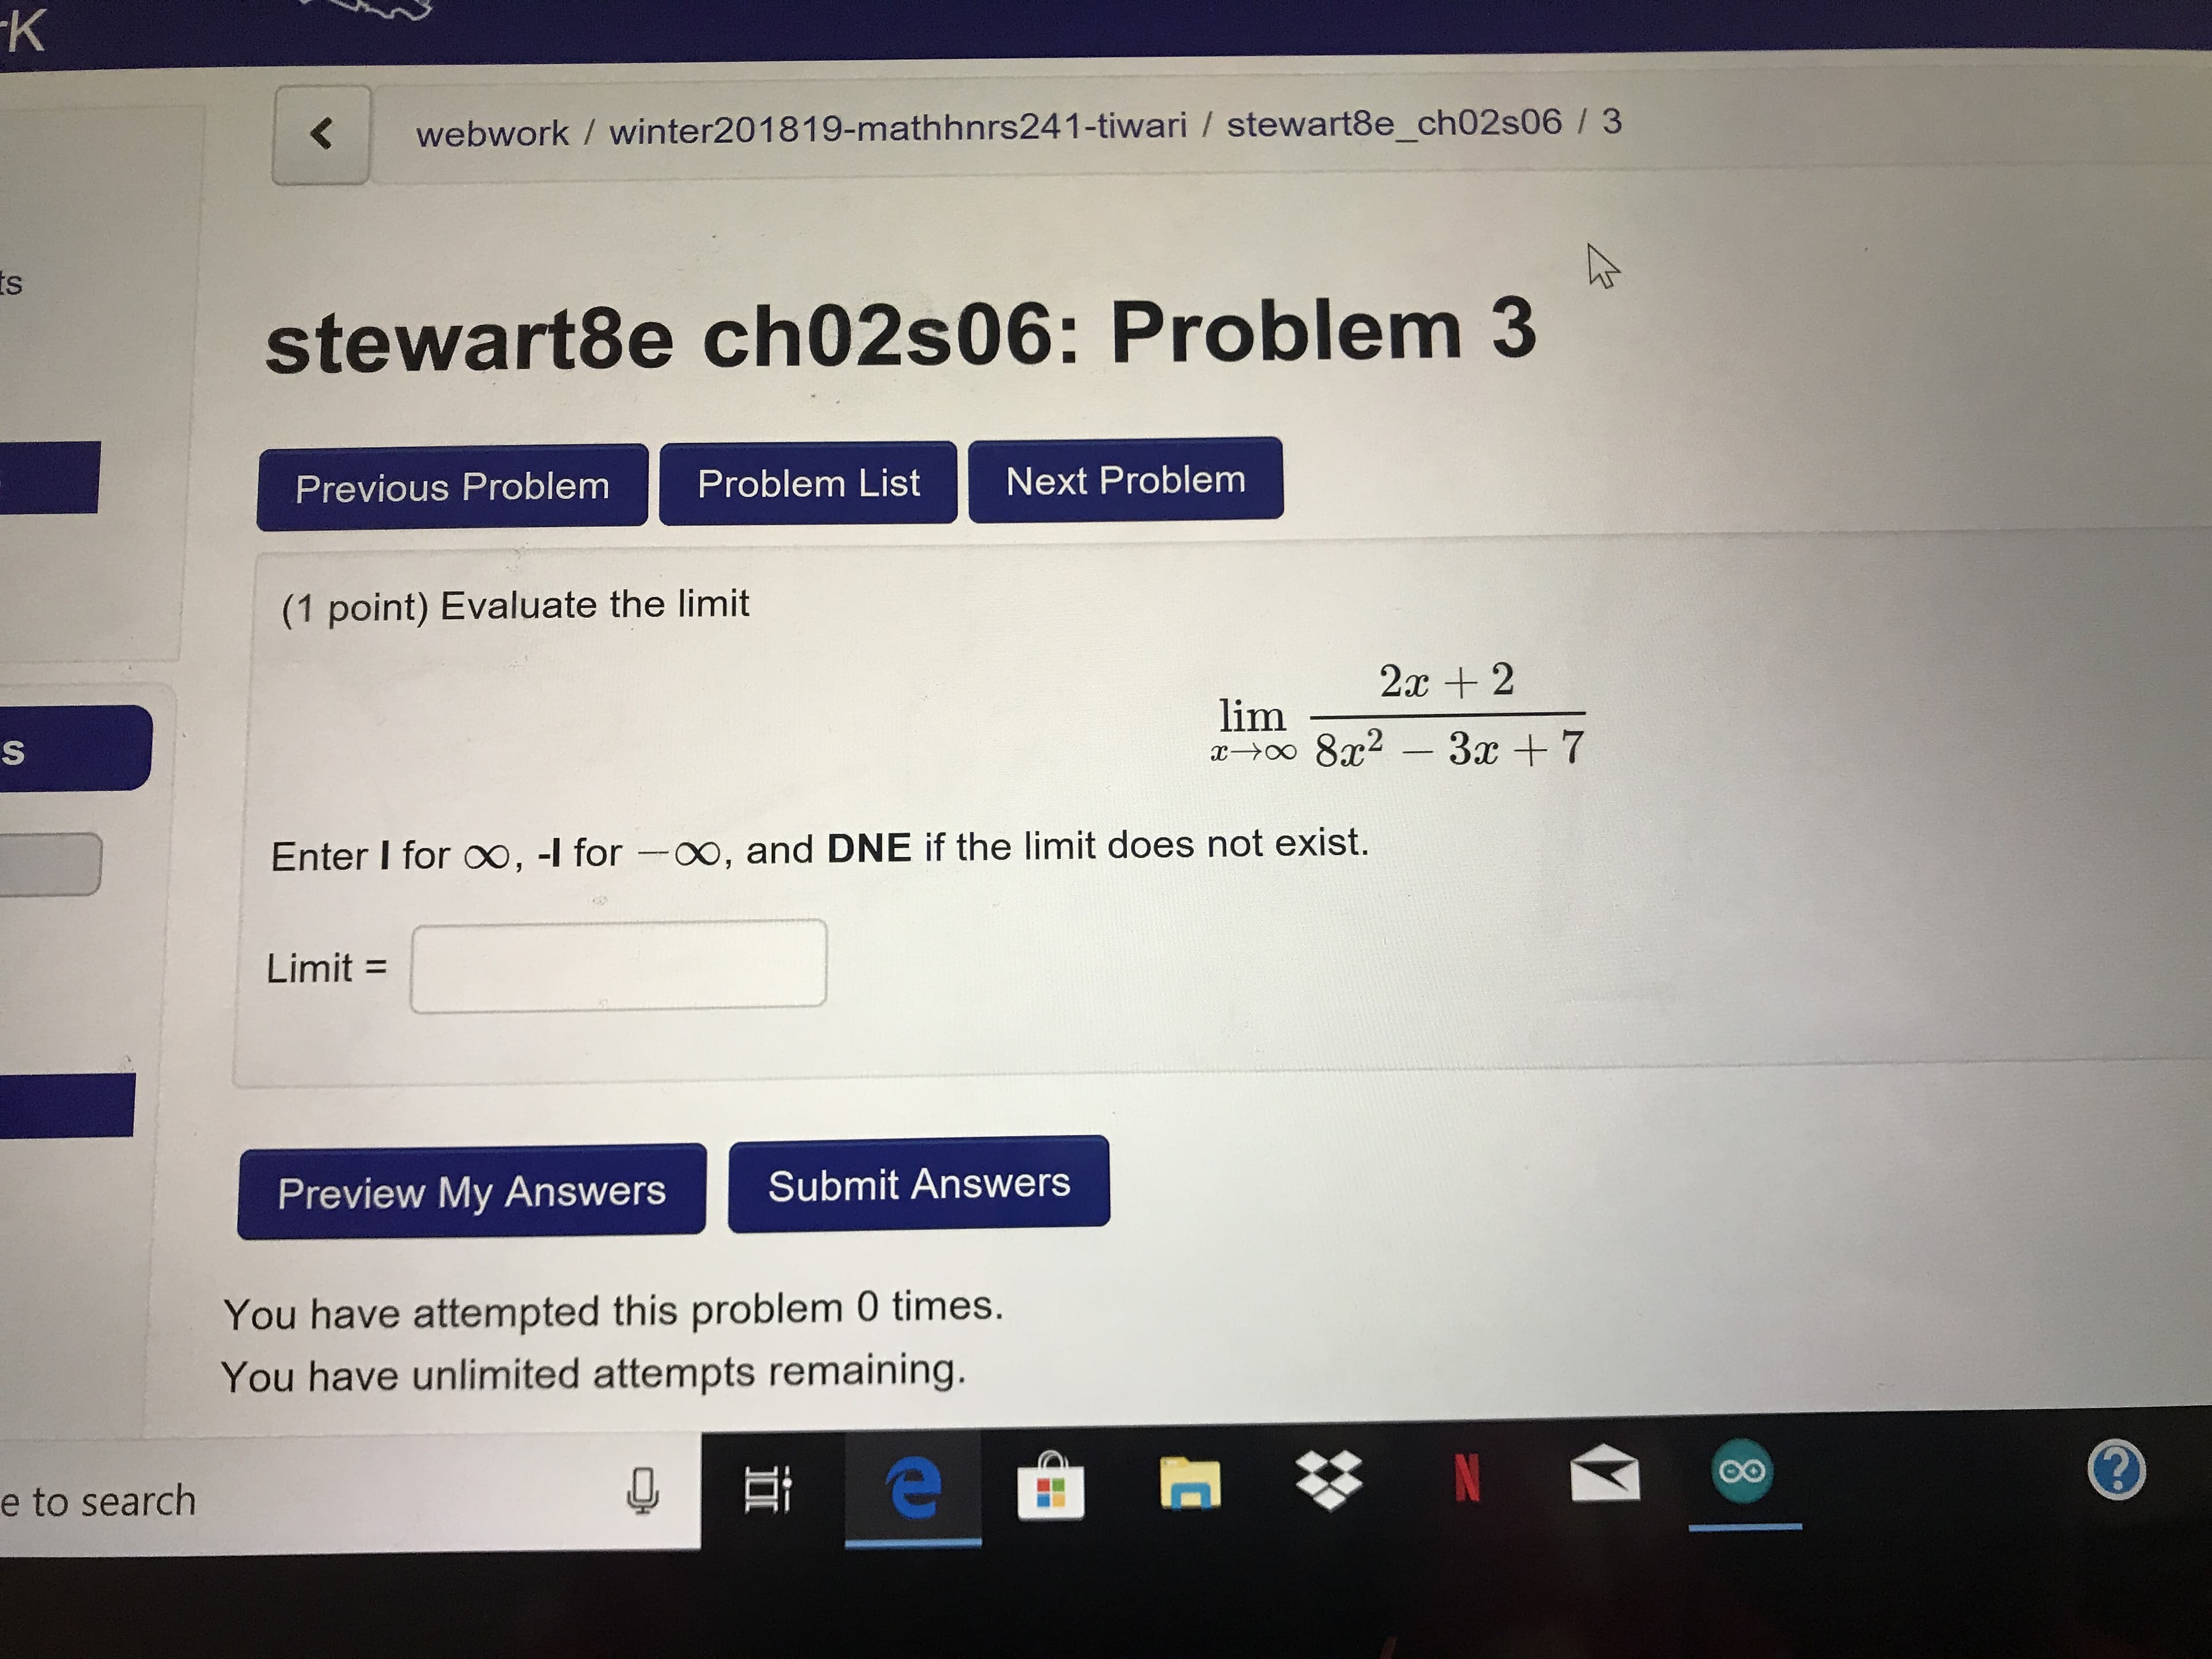 K webwork / winter201819-mathhnrs241-tiwari / stewart8e_ch02s06 /3
stewart8e ch02s06: Problem 3
Previous Problem Problem List Next Problem
(1 point) Evaluate the limit
2c 2
Enter I for oo, -l for -oo, and DNE if the limit does not exist.
Limit -
Preview My AnswersSubmit Answers
You have attempted this problem 0 times.
You have unlimited attempts remaining.
e to search
